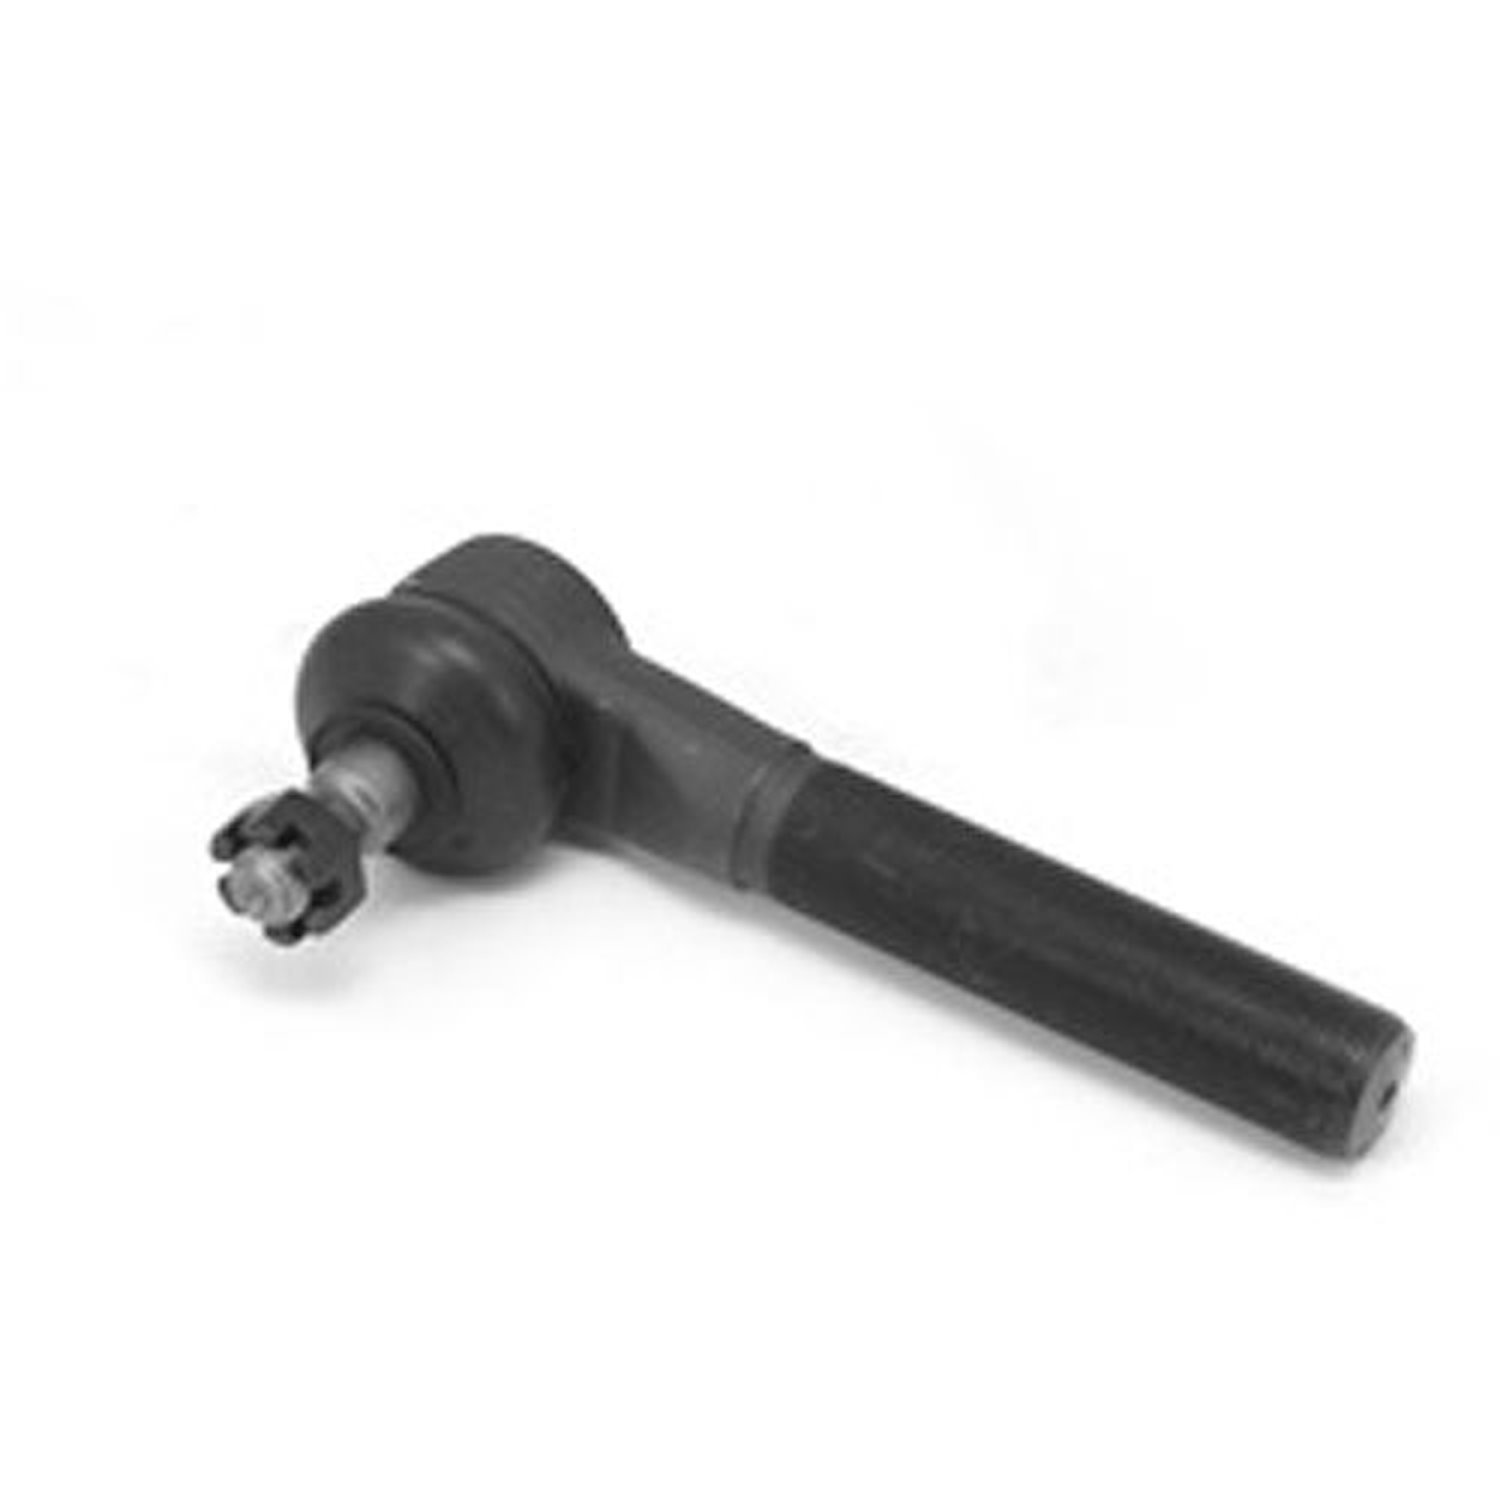 Replacement tie rod end from Omix-ADA threads into drag link and attaches to pitman arm